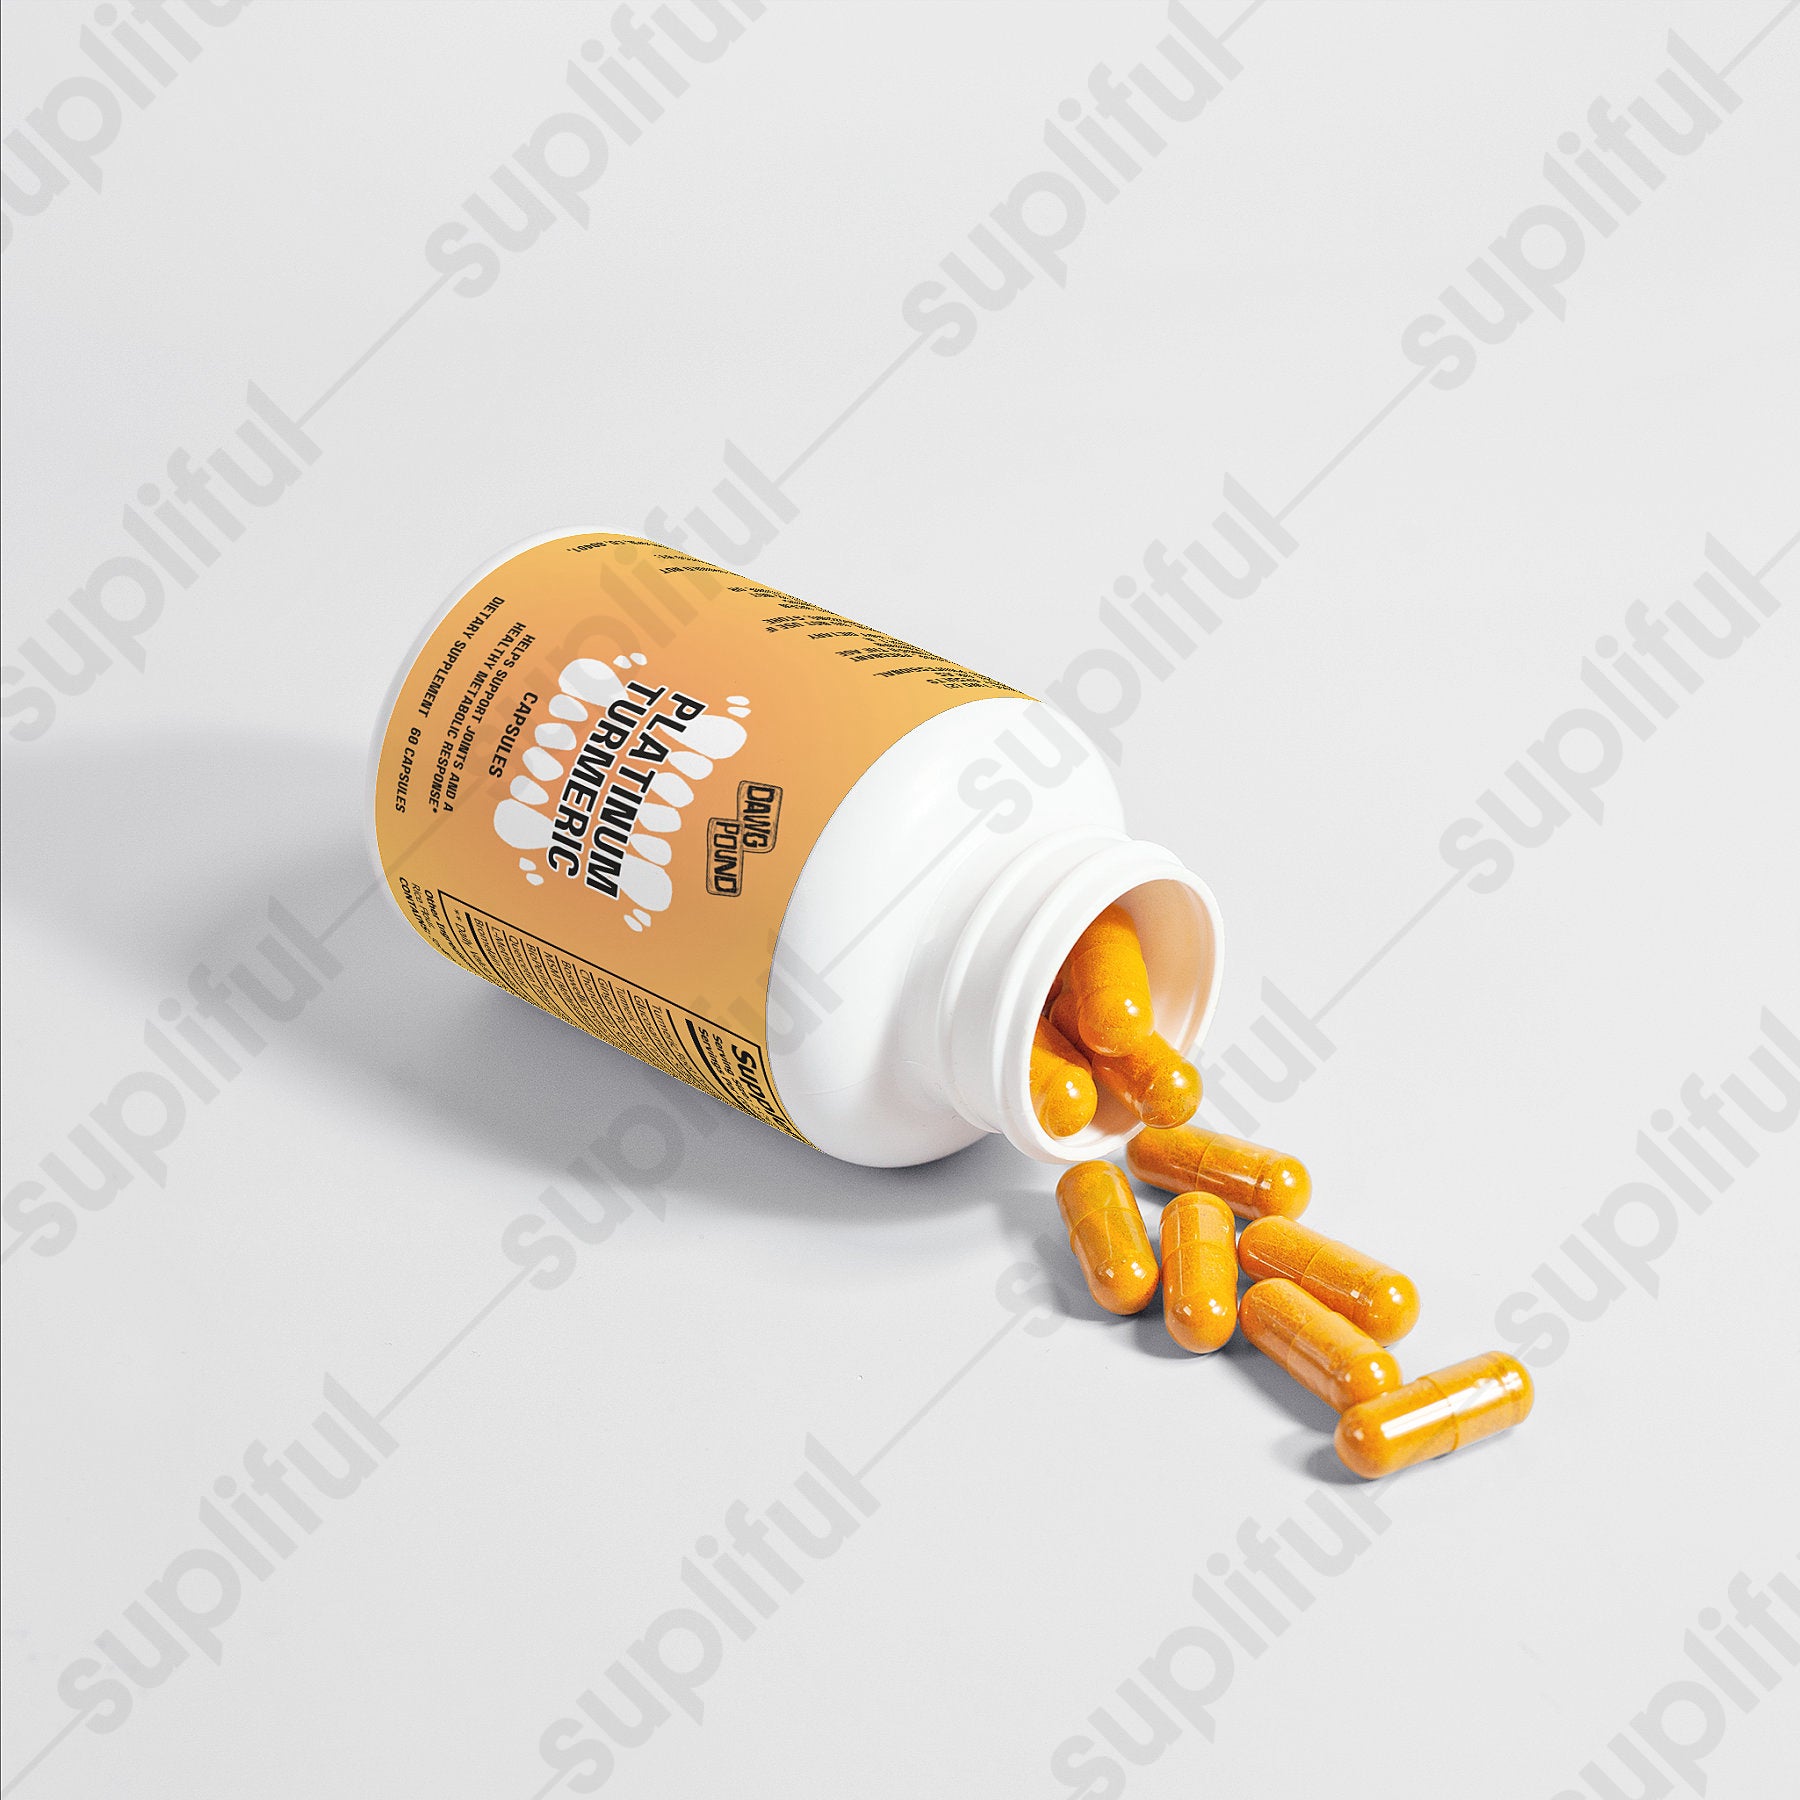 Dawg Pound Platinum Turmeric Supplement Capsules - Opened Bottle with Capsules Flowing Out